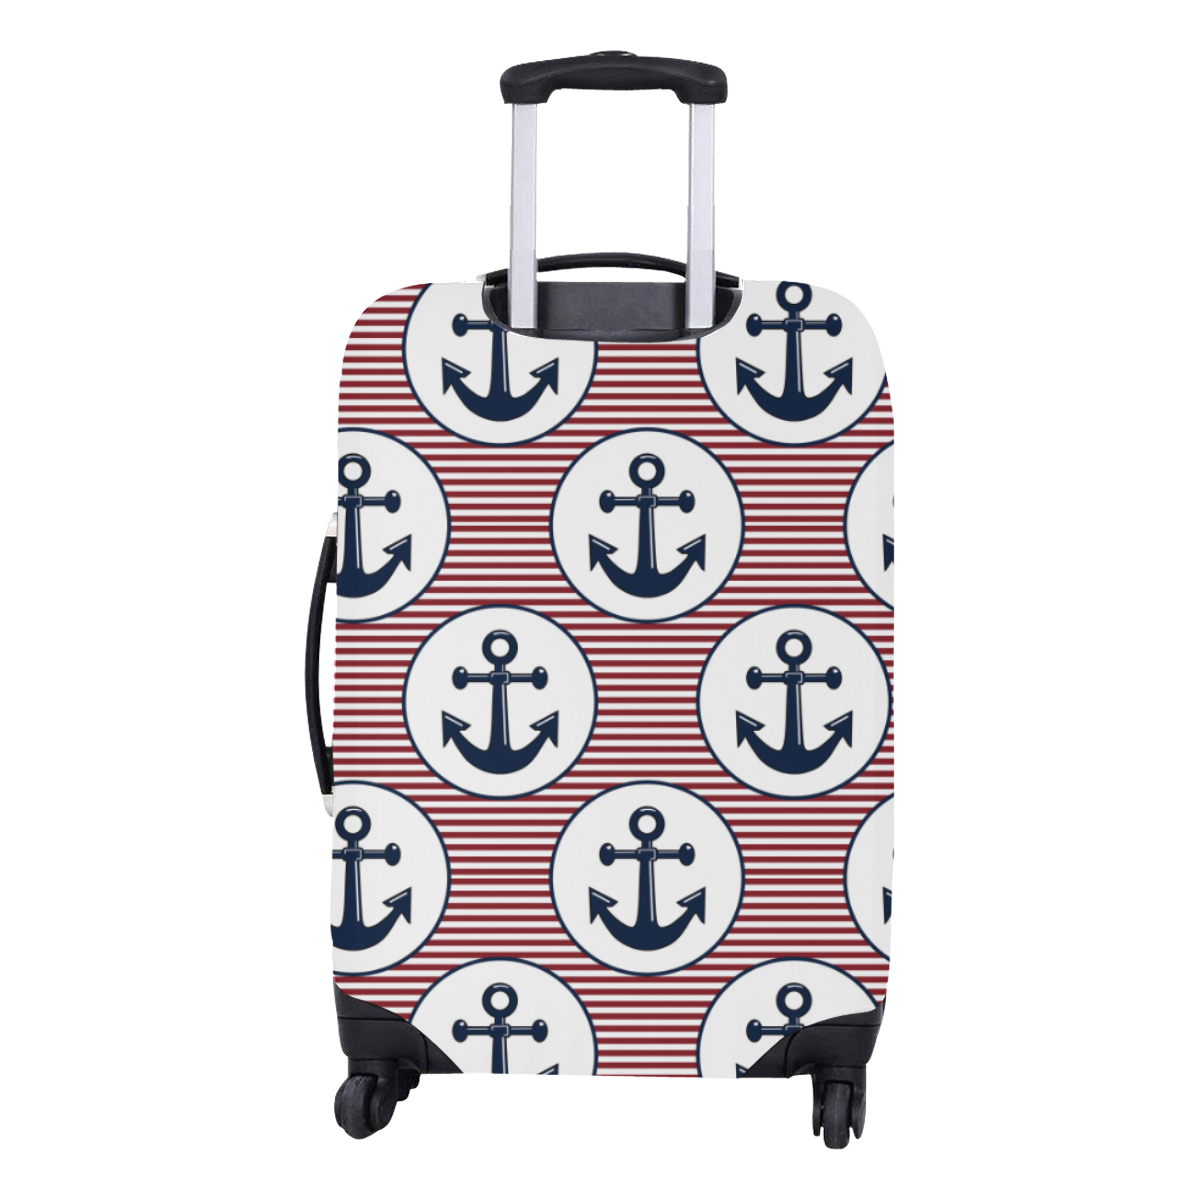 navy and red anchor nautical design Luggage Cover/Medium 22"-25"